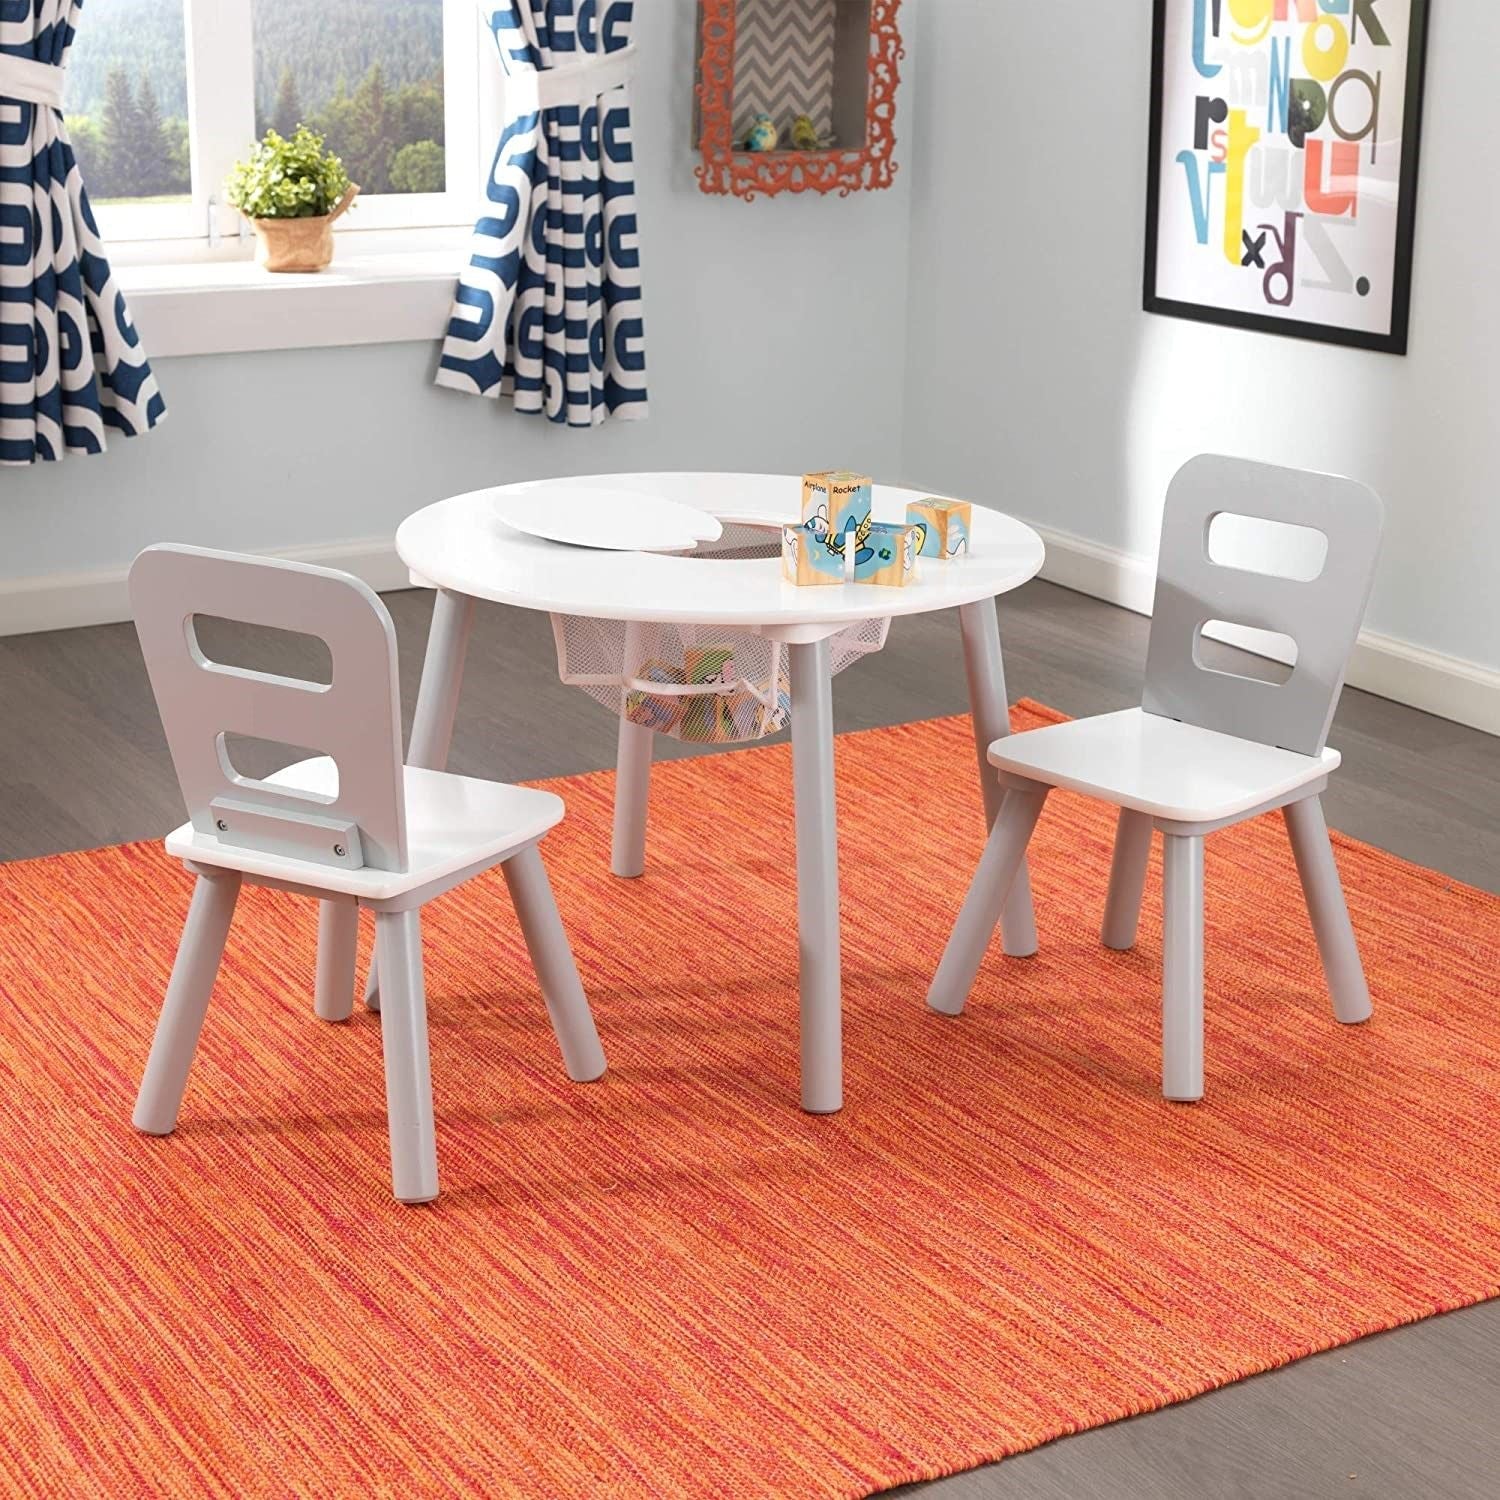 Stylish Round Table and Two Chair Set for Kids in Grey: A Space of Their Own